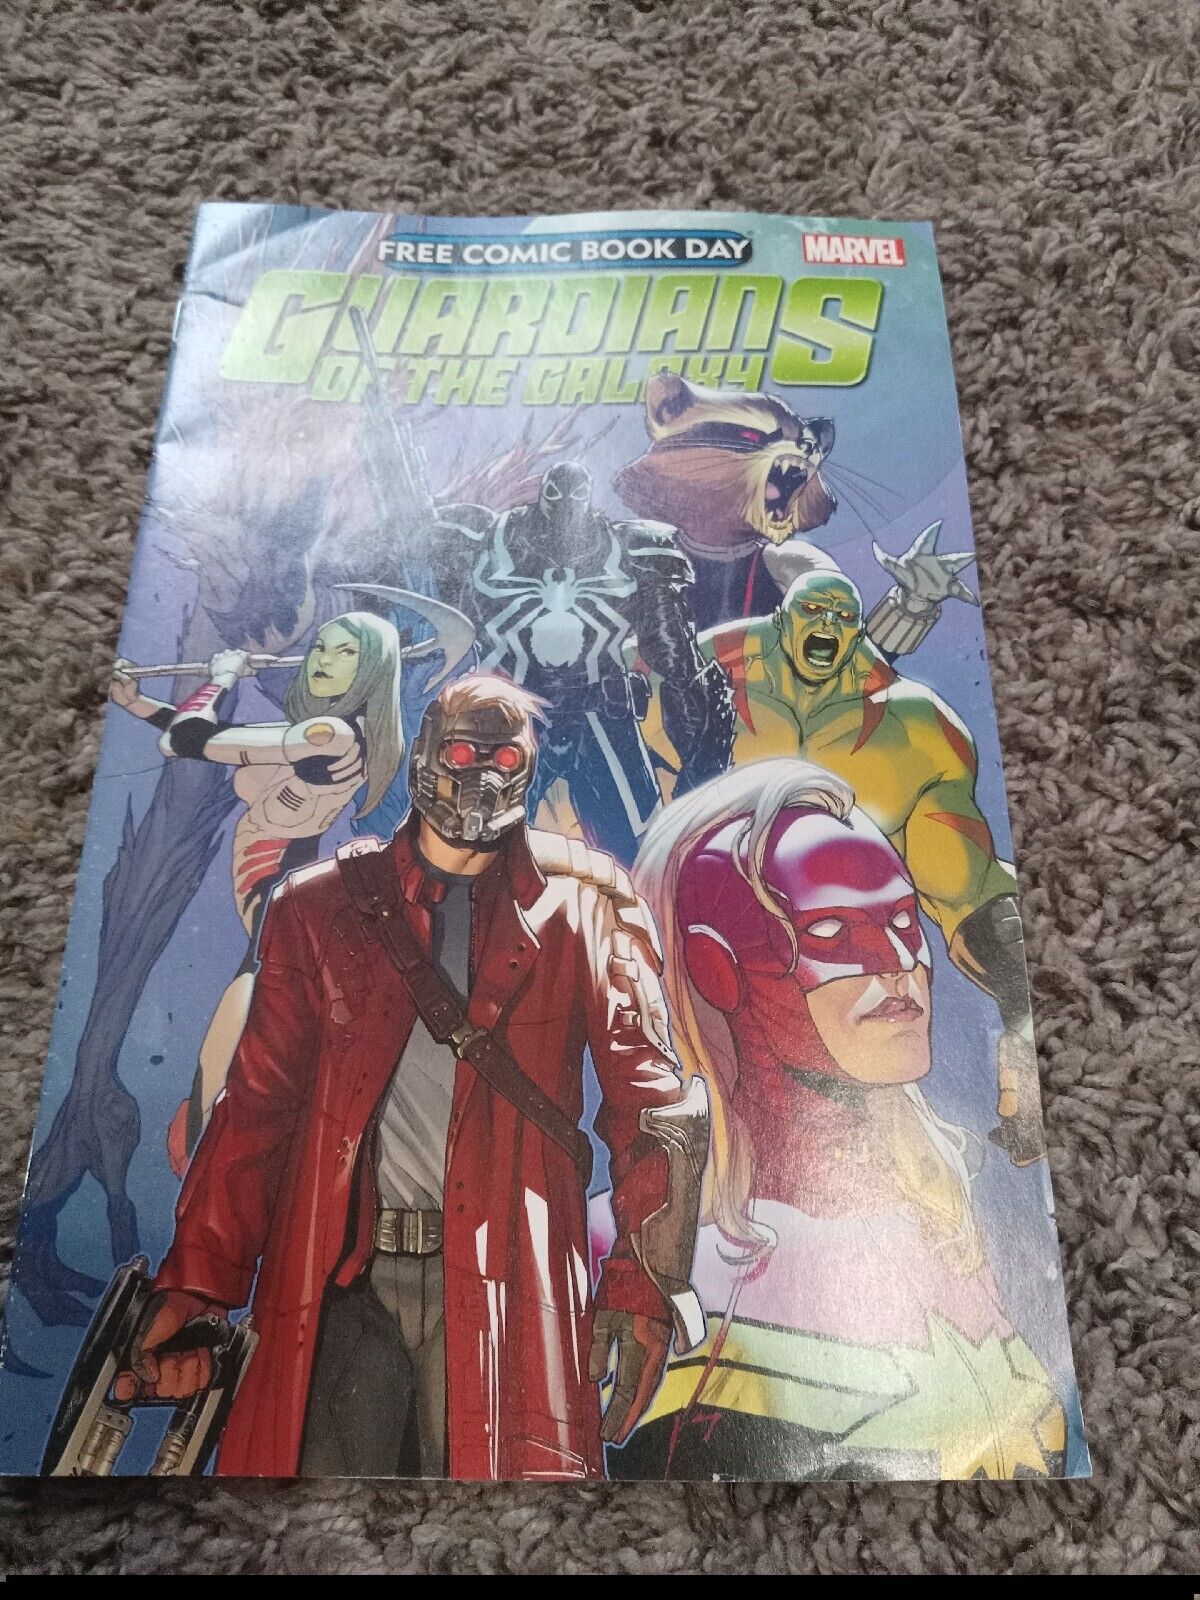 Guardians Of The Galaxy (Free Comic Book Day 2014) Marvel Comics